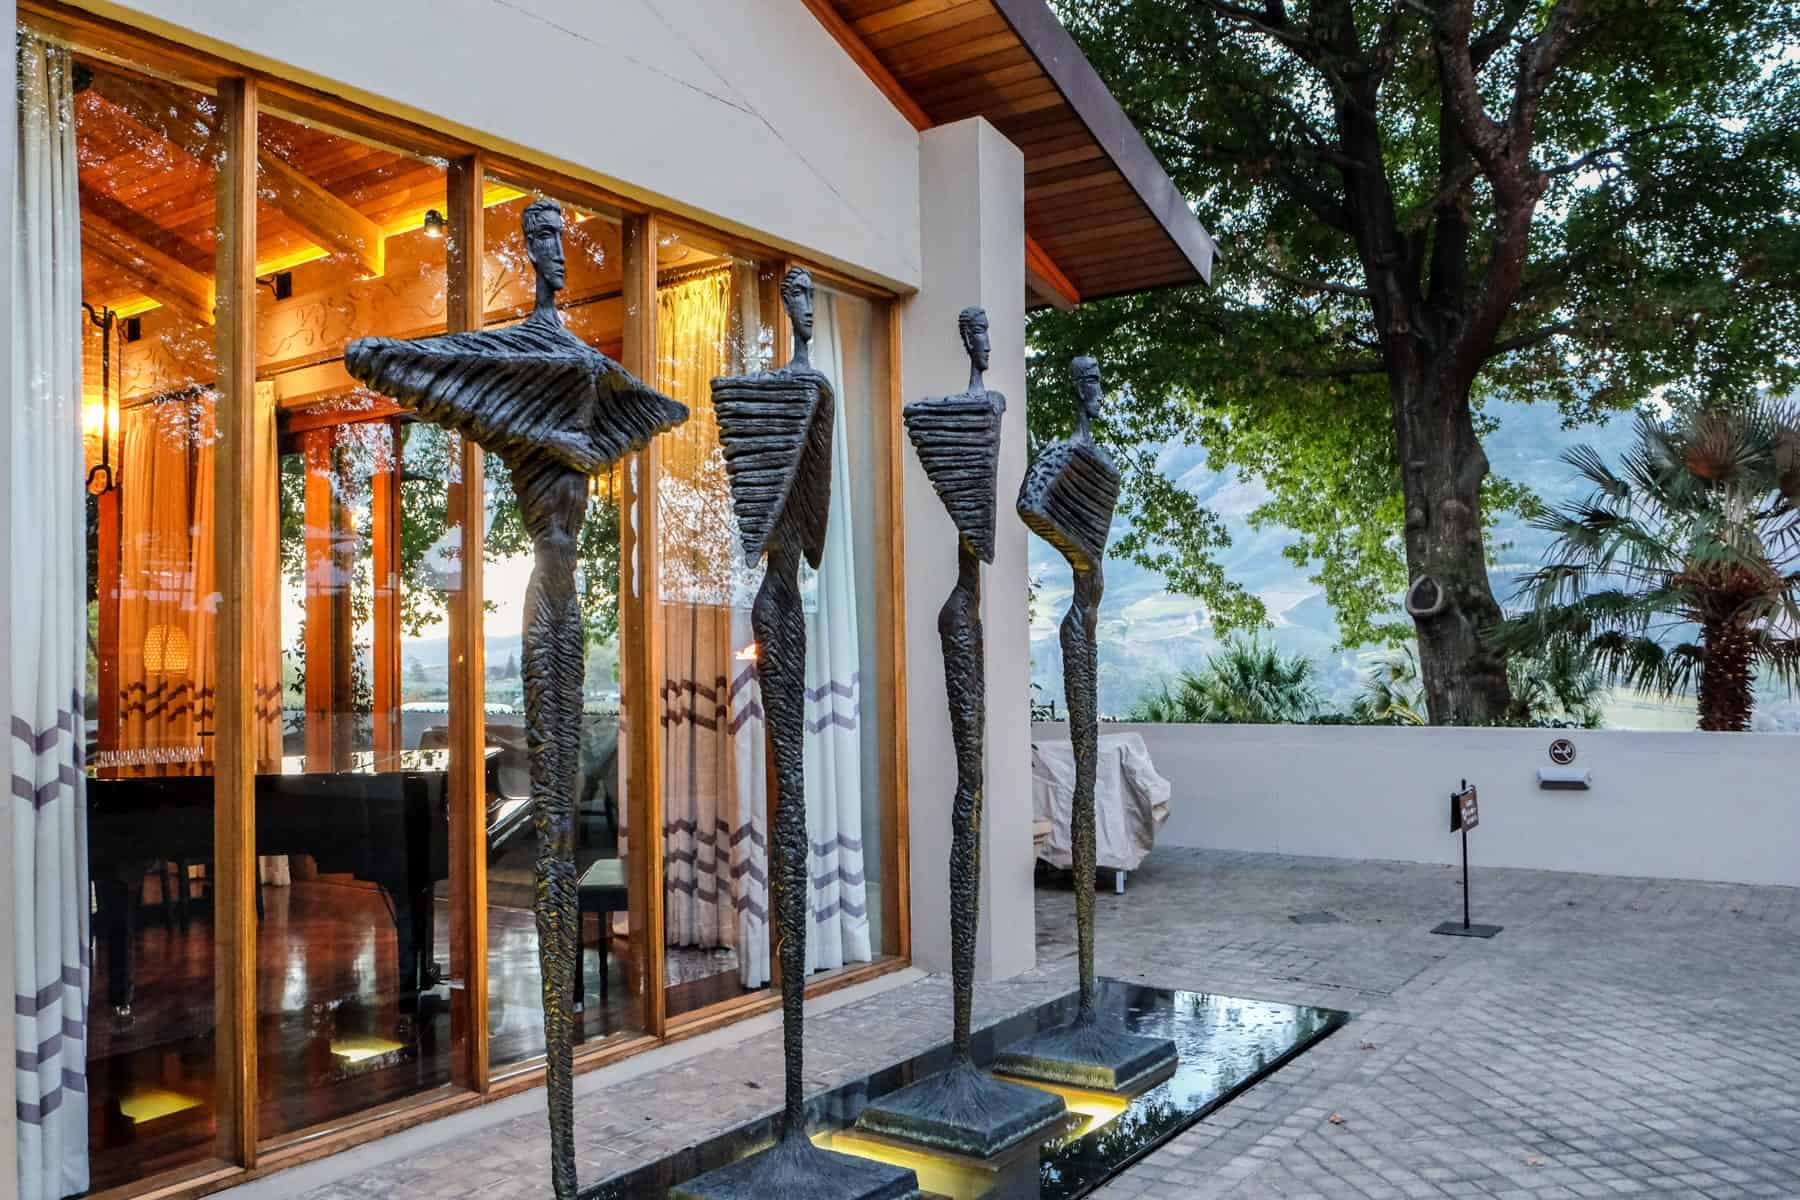 Four metal statues that resemble angels with wings stand outside a white building with a golden lit interior and next to grand trees. They are artworks on display at the Delaire Graff Estate in Stellenbosch 